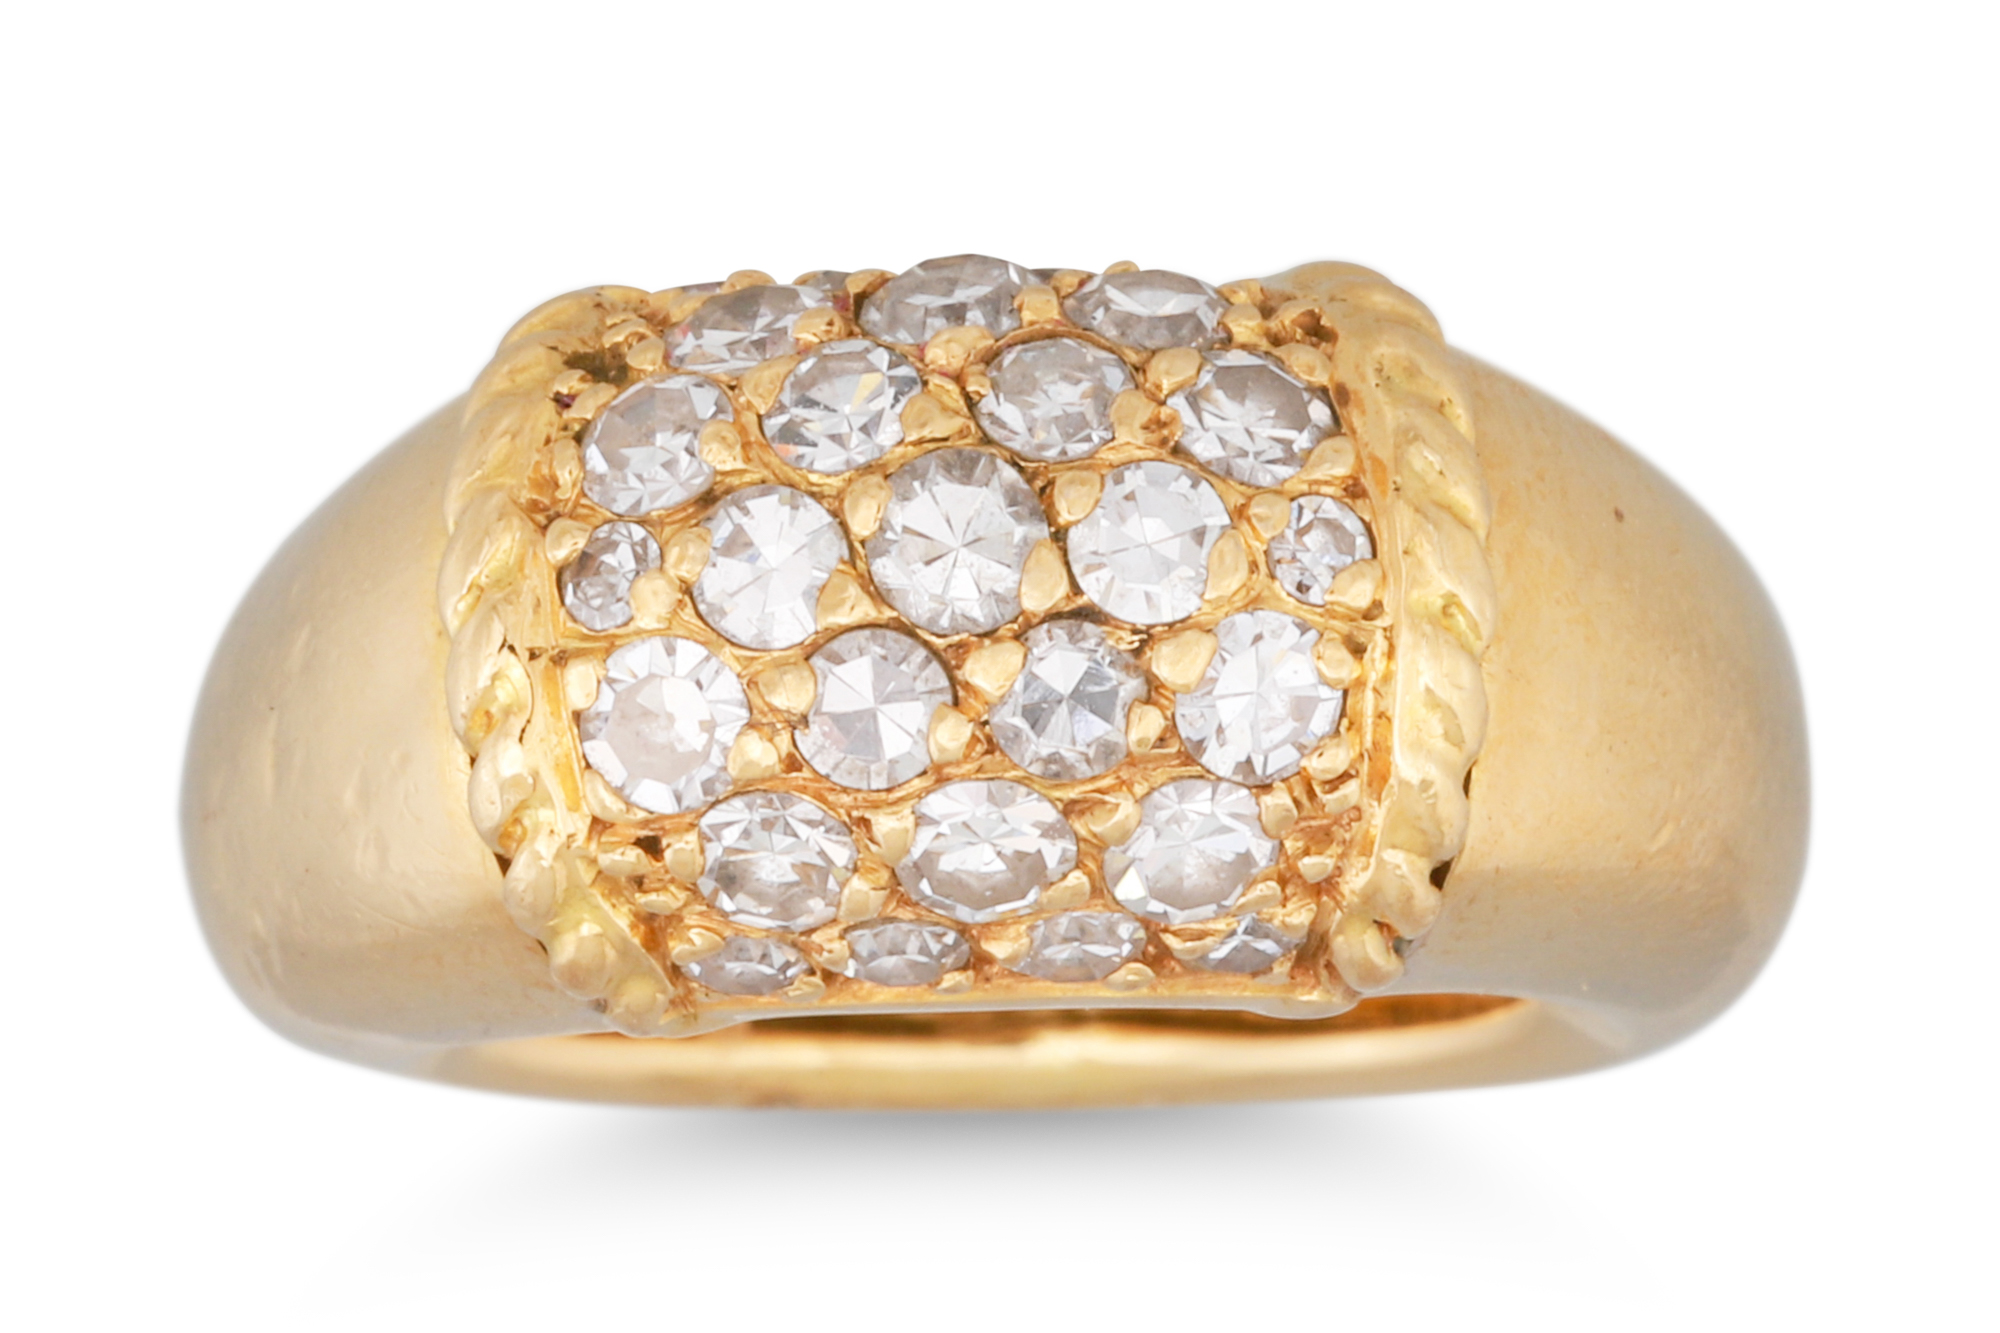 A VAN CLEEF & ARPELS DIAMOND SET PHILIPPINE RING, pavé set in 18ct yellow gold, stamped VCA, - Image 2 of 2